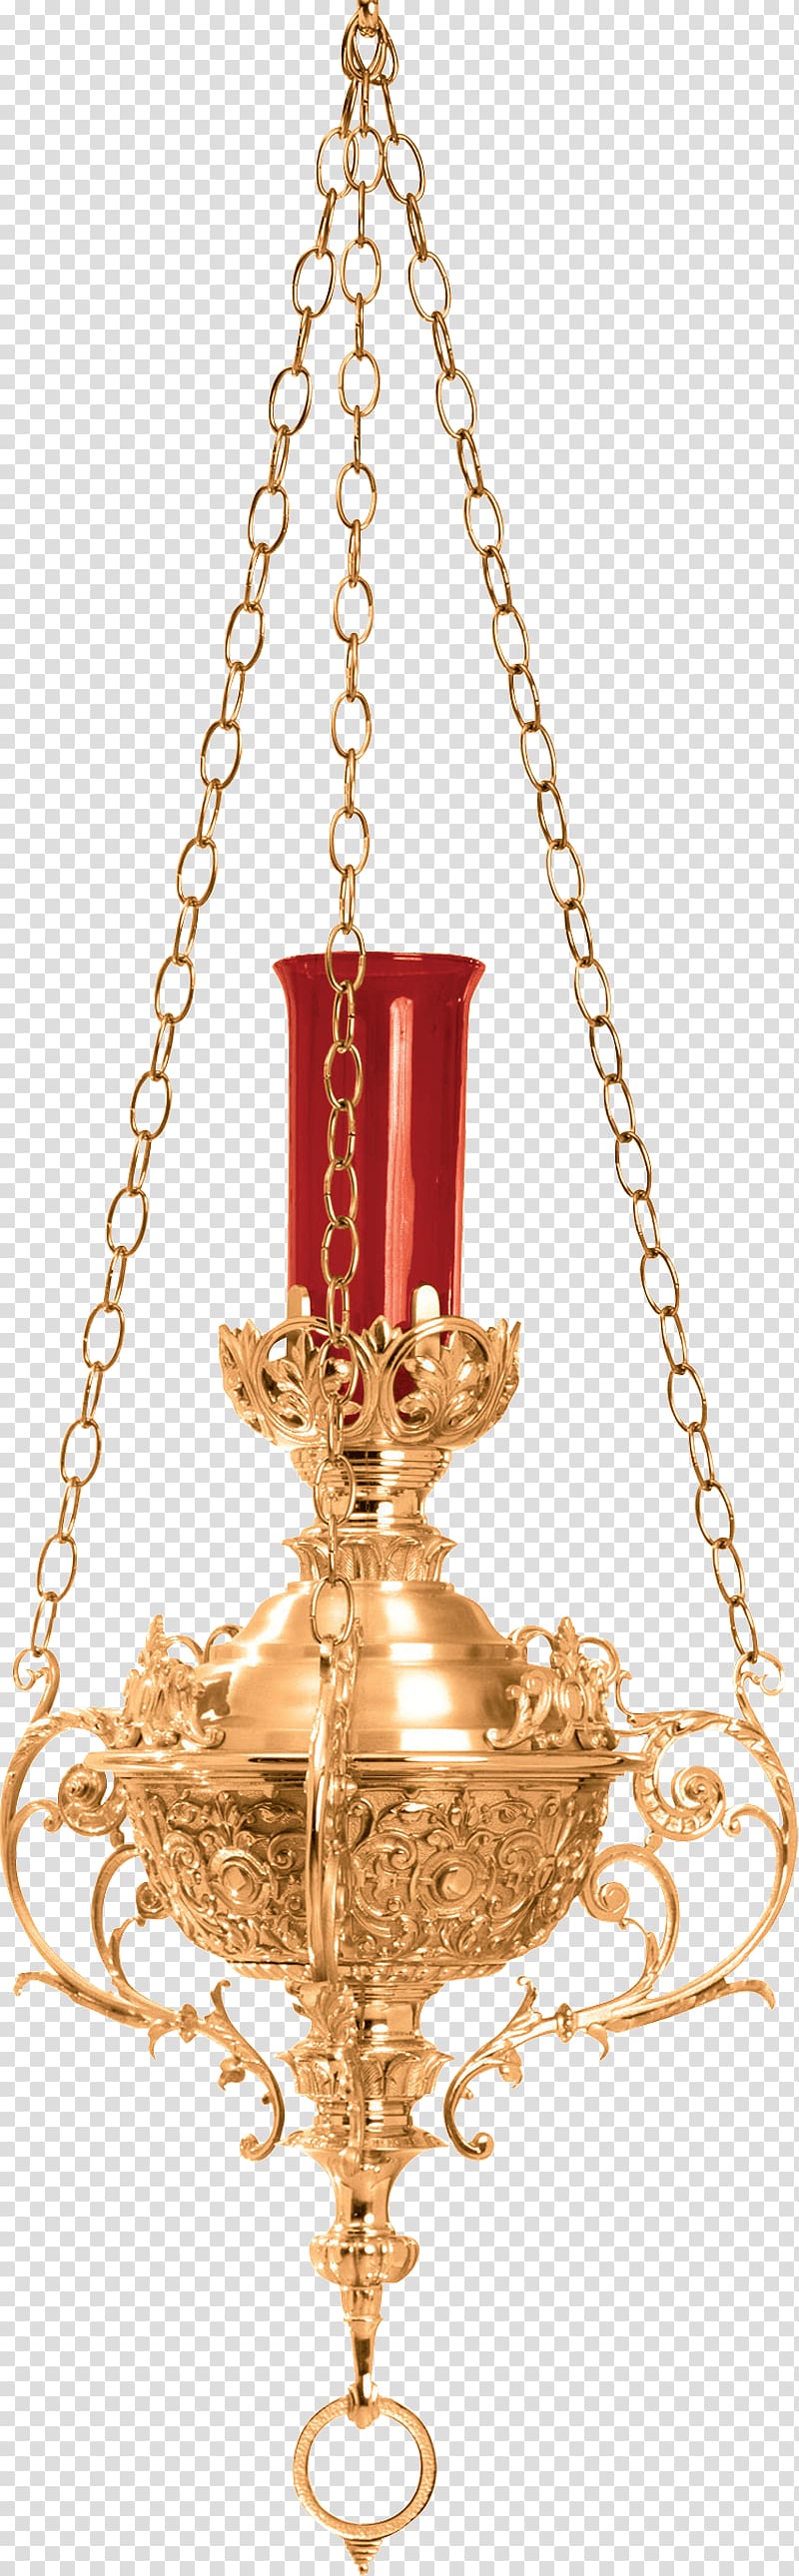 Lighting Sanctuary lamp 01504 Candlestick Body Jewellery, Candle transparent background PNG clipart